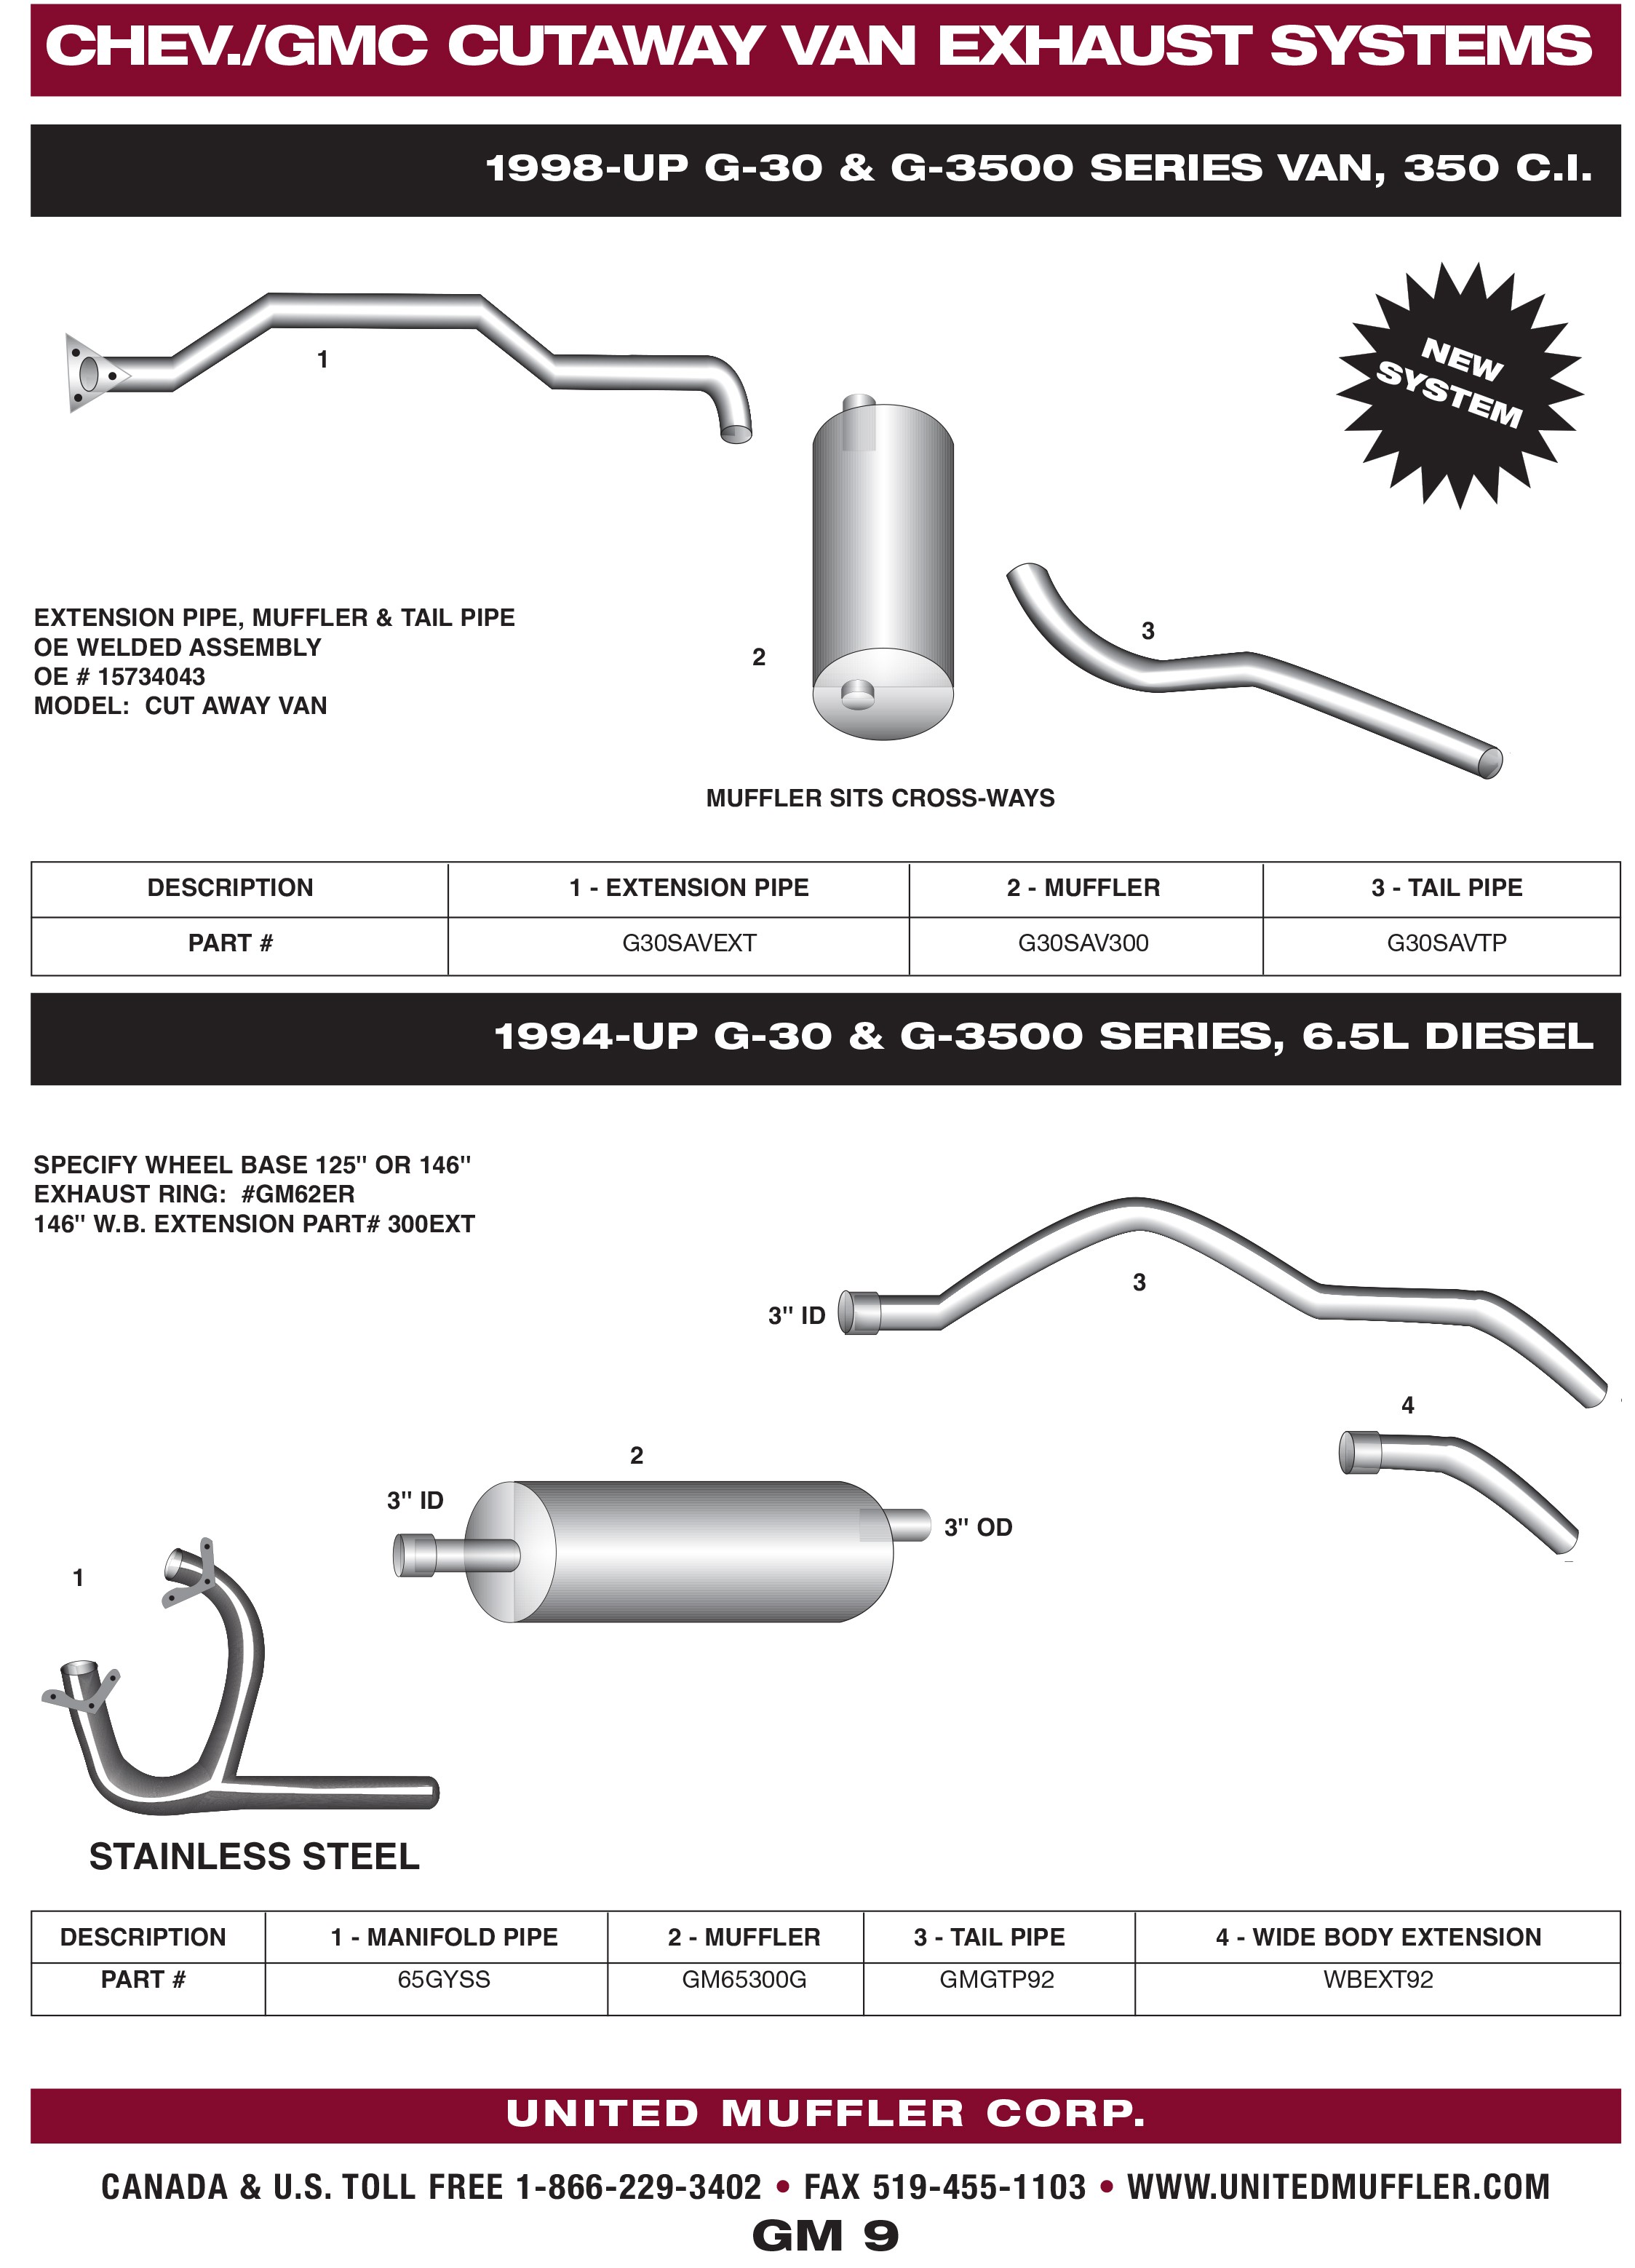 Exhaust System Parts Diagram Chev Gmc Of Exhaust System Parts Diagram